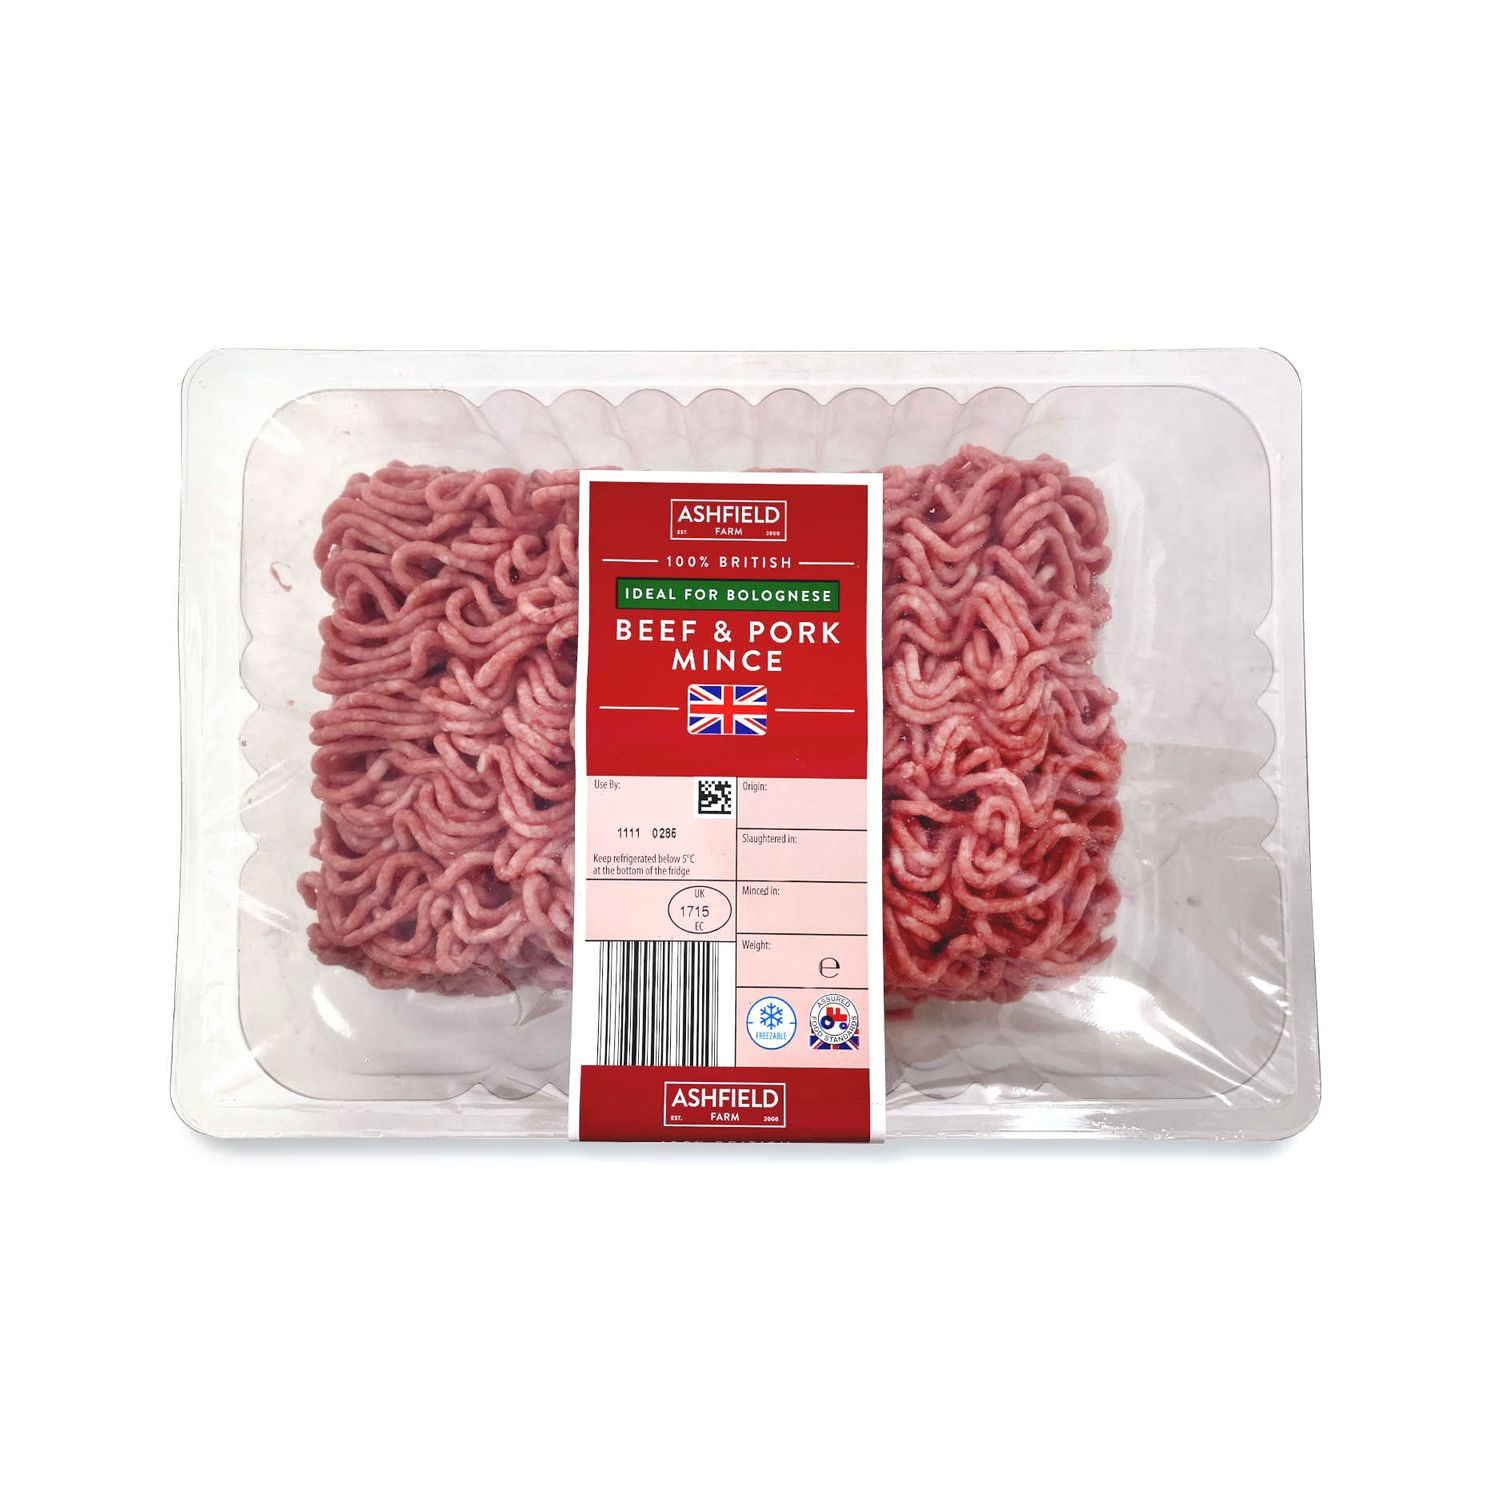 can i use beef mince after use by date